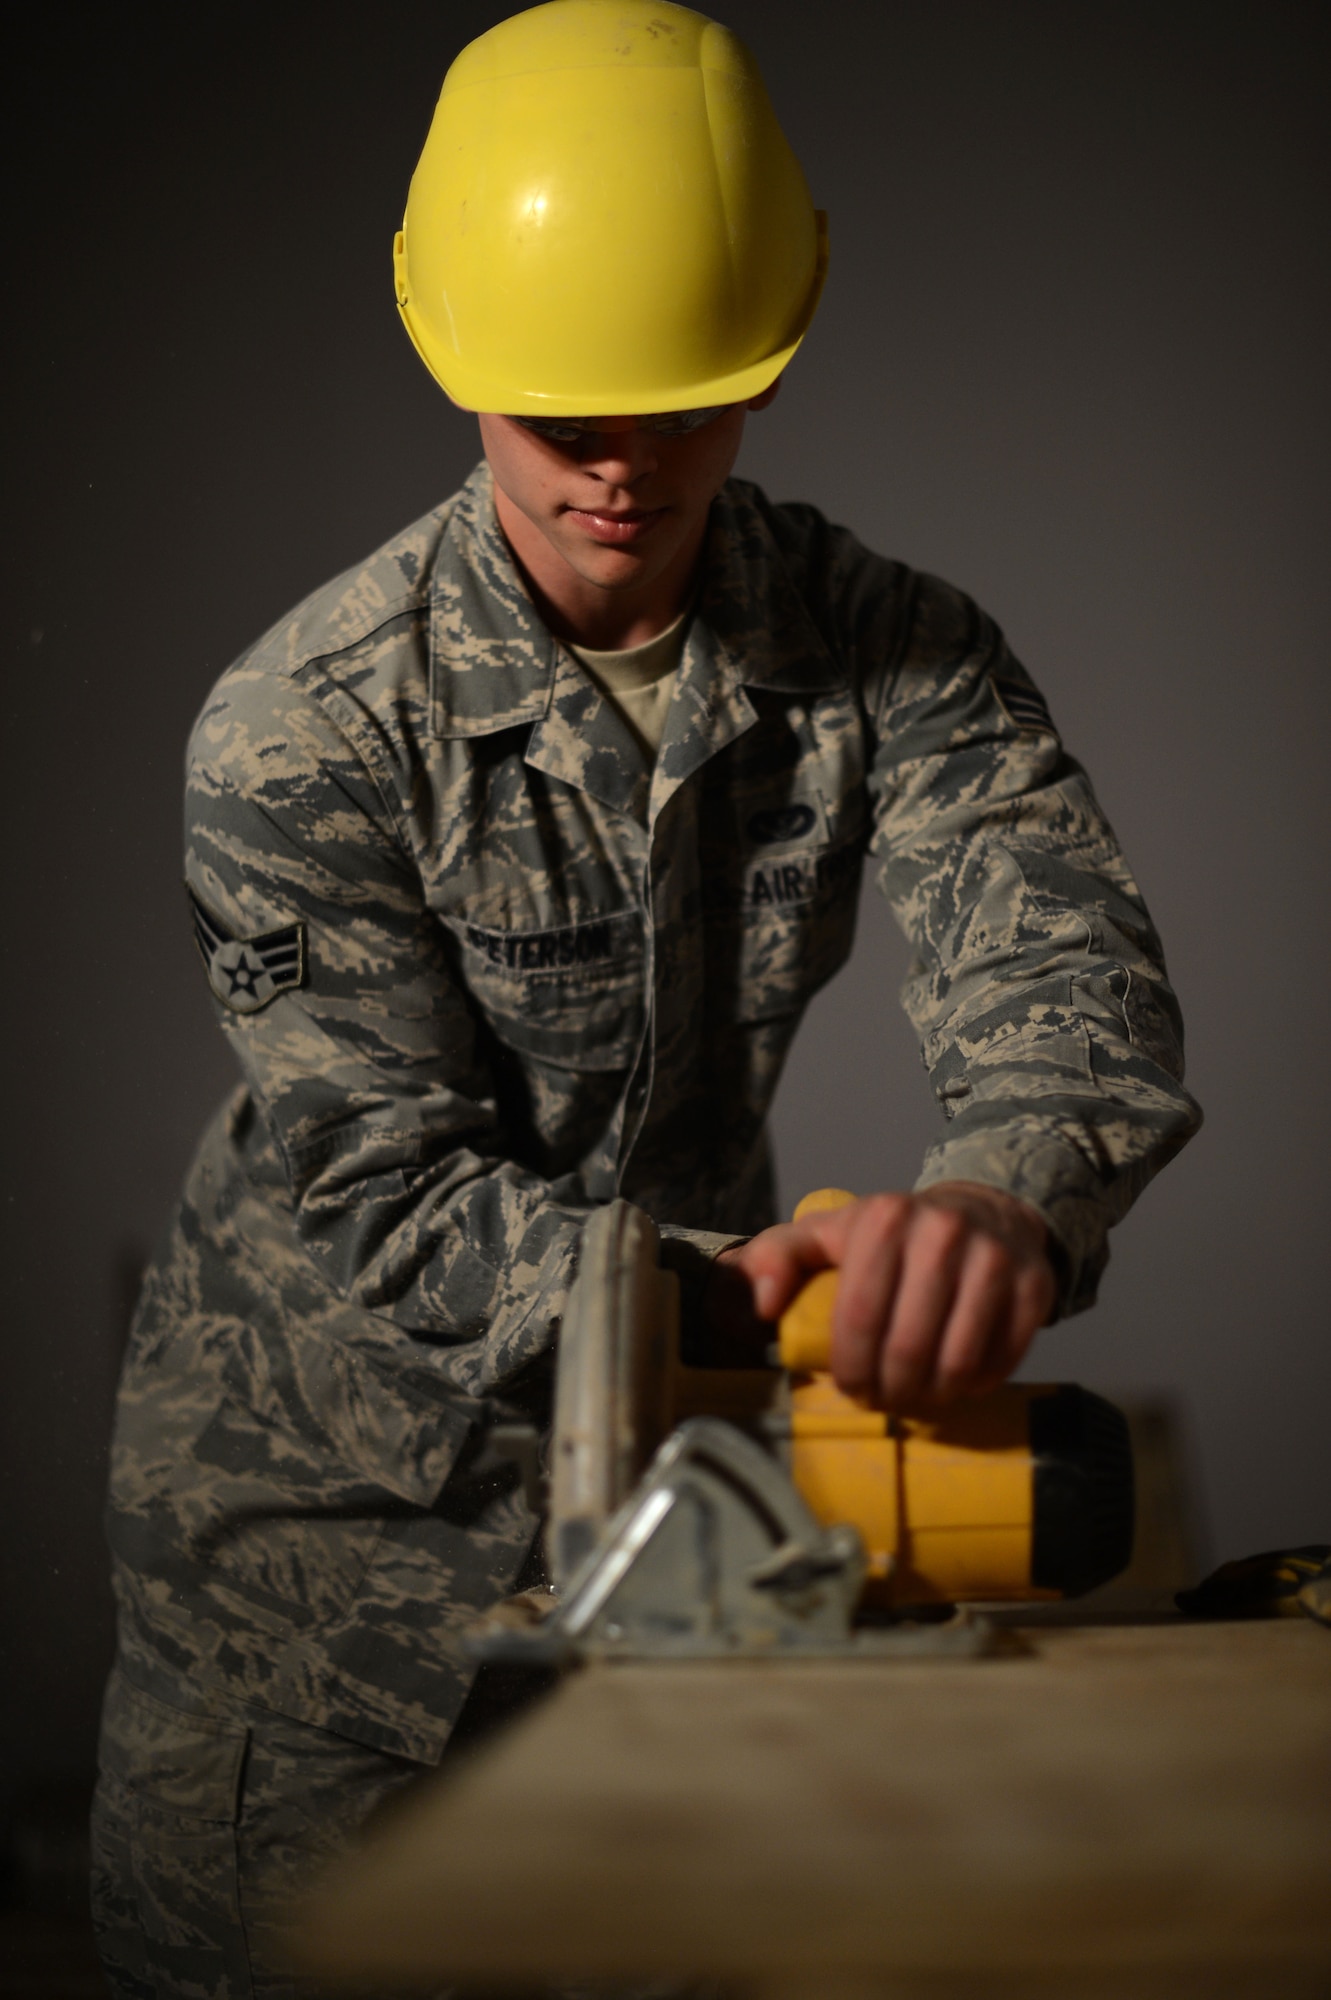 U.S. Air Force Senior Airman Dylan Peterson, a 52nd Civil Engineer Squadron structures technician from Fargo, N.D., saws a sheet of wood at a construction site inside the Skelton Memorial Fitness Center Aug. 26, 2014. The state-of-the-art combat fitness gym may house more than 150 people and support more than 20 classes a week upon its completion. (U.S. Air Force photo by Senior Airman Gustavo Castillo/Released) 